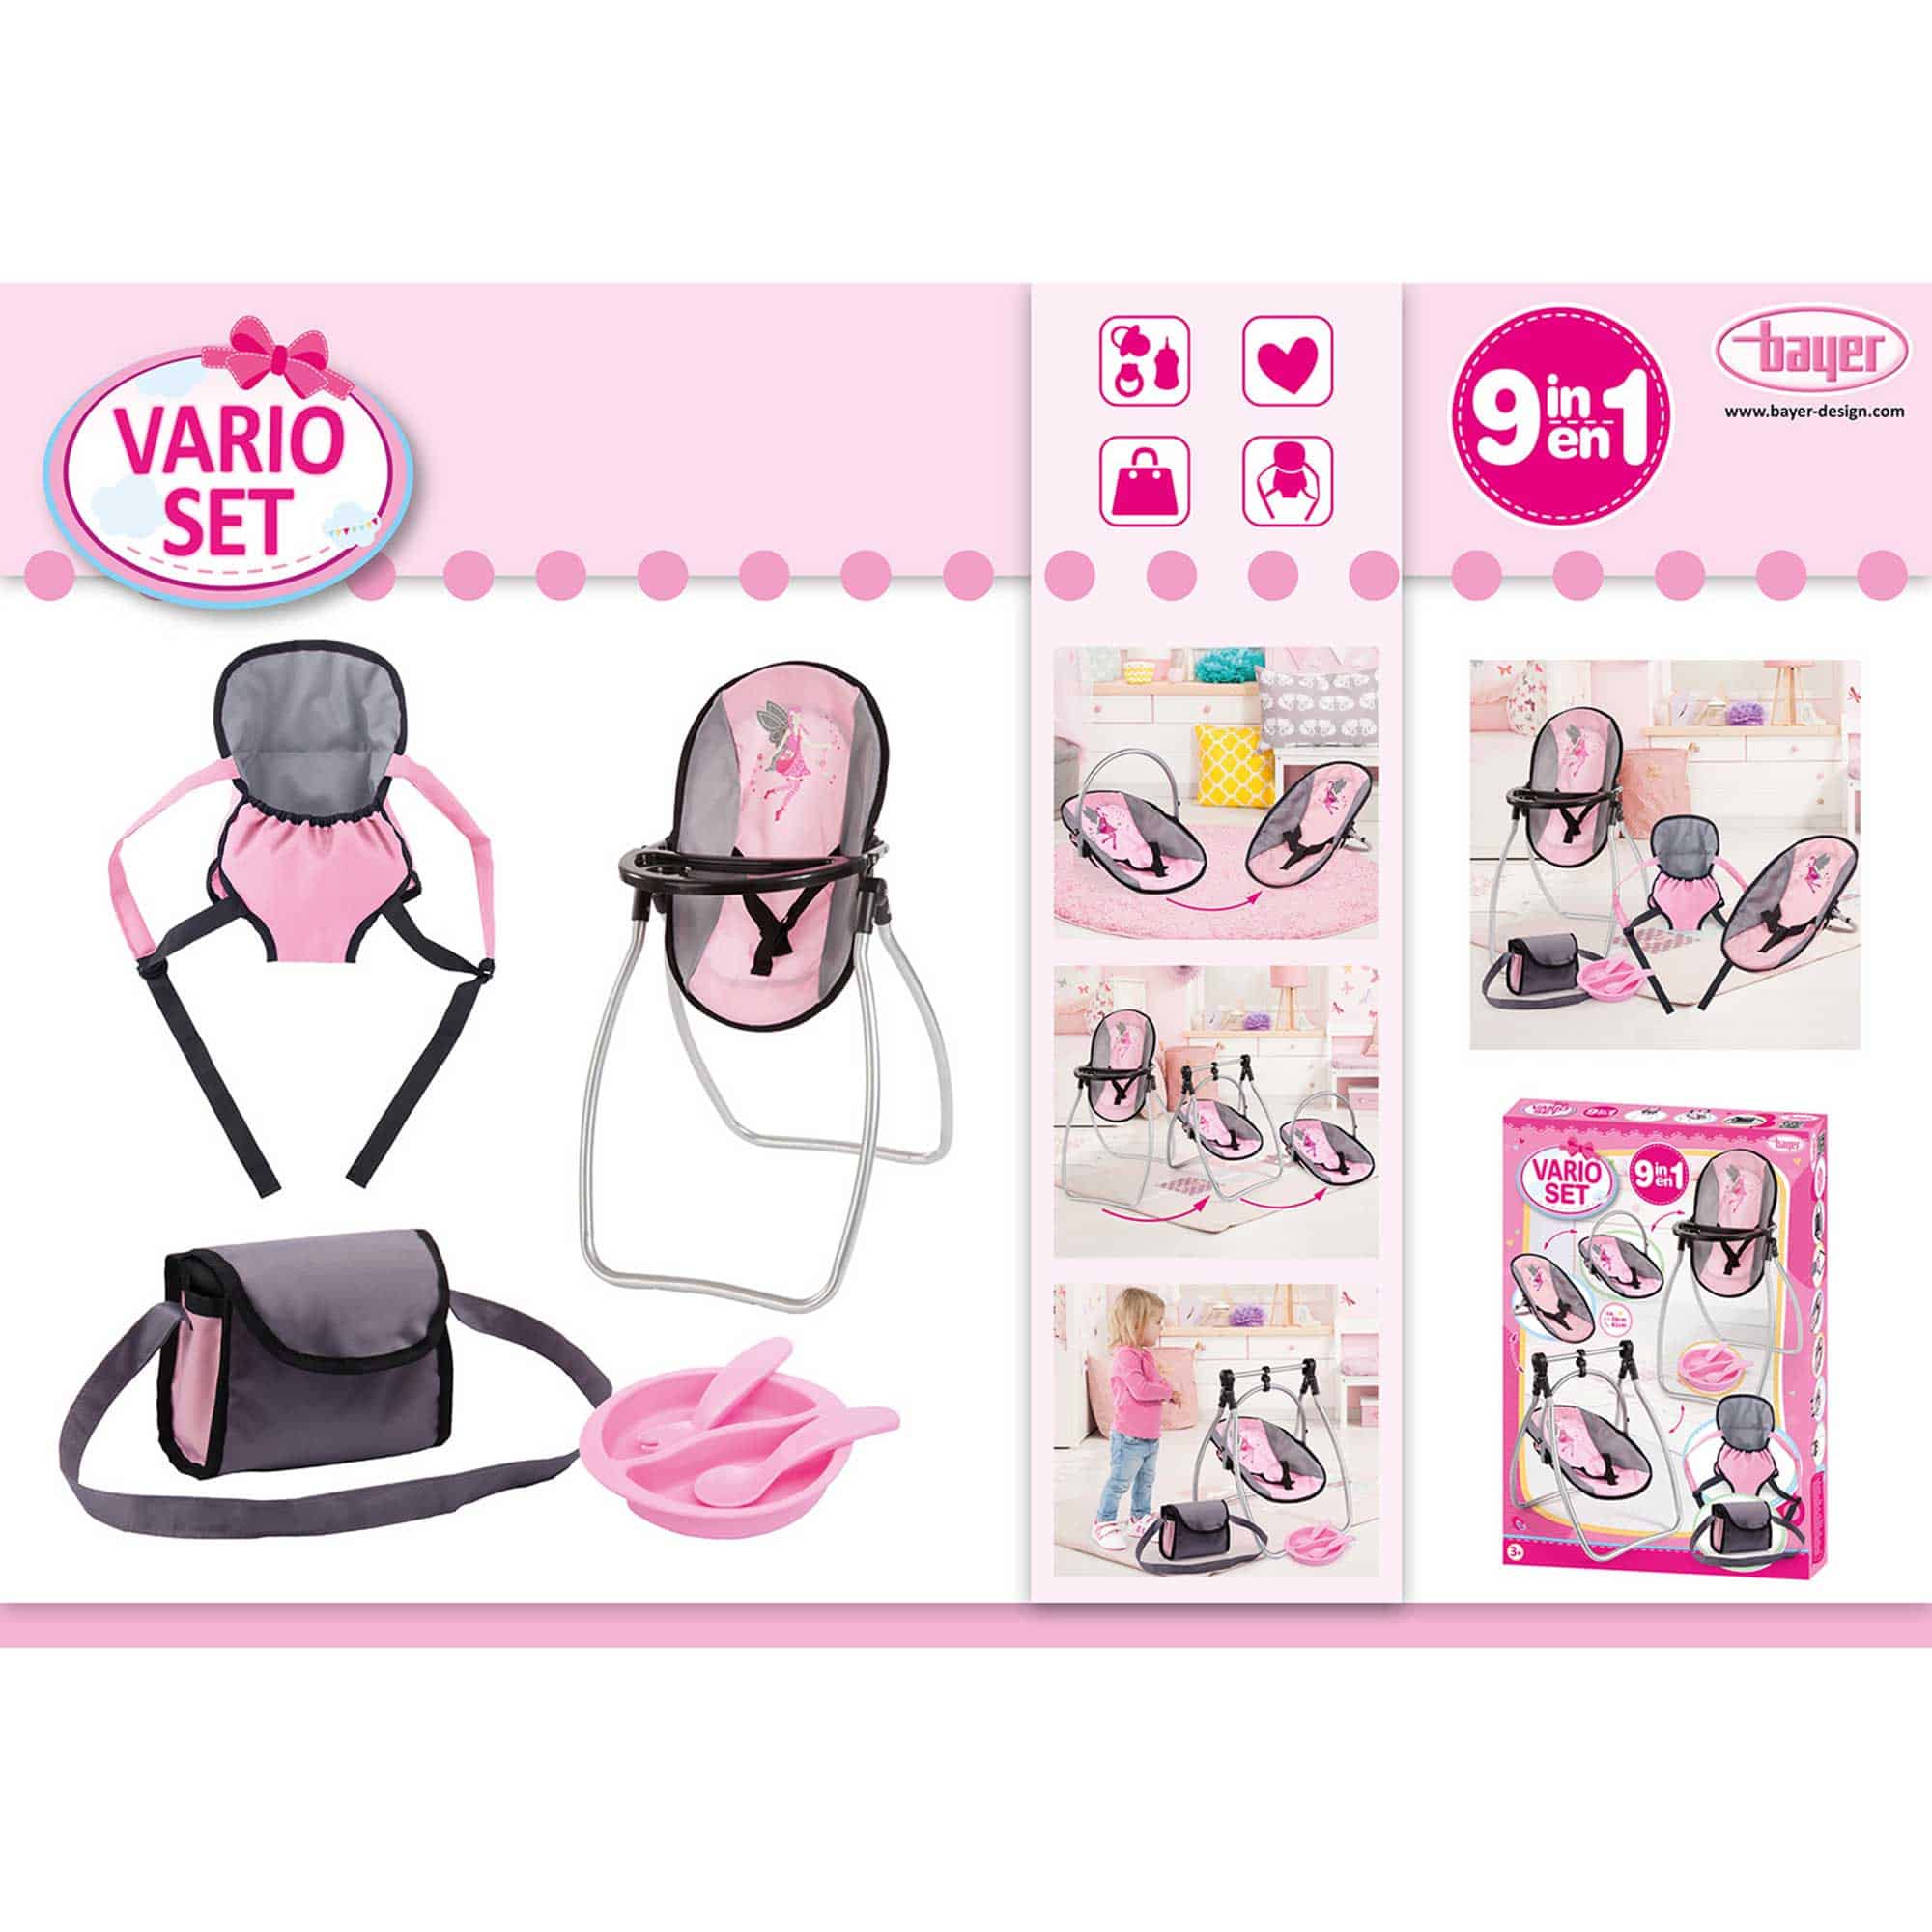 Bayer Vario 9-in-1 Doll Accessories Set - Pink and Gray